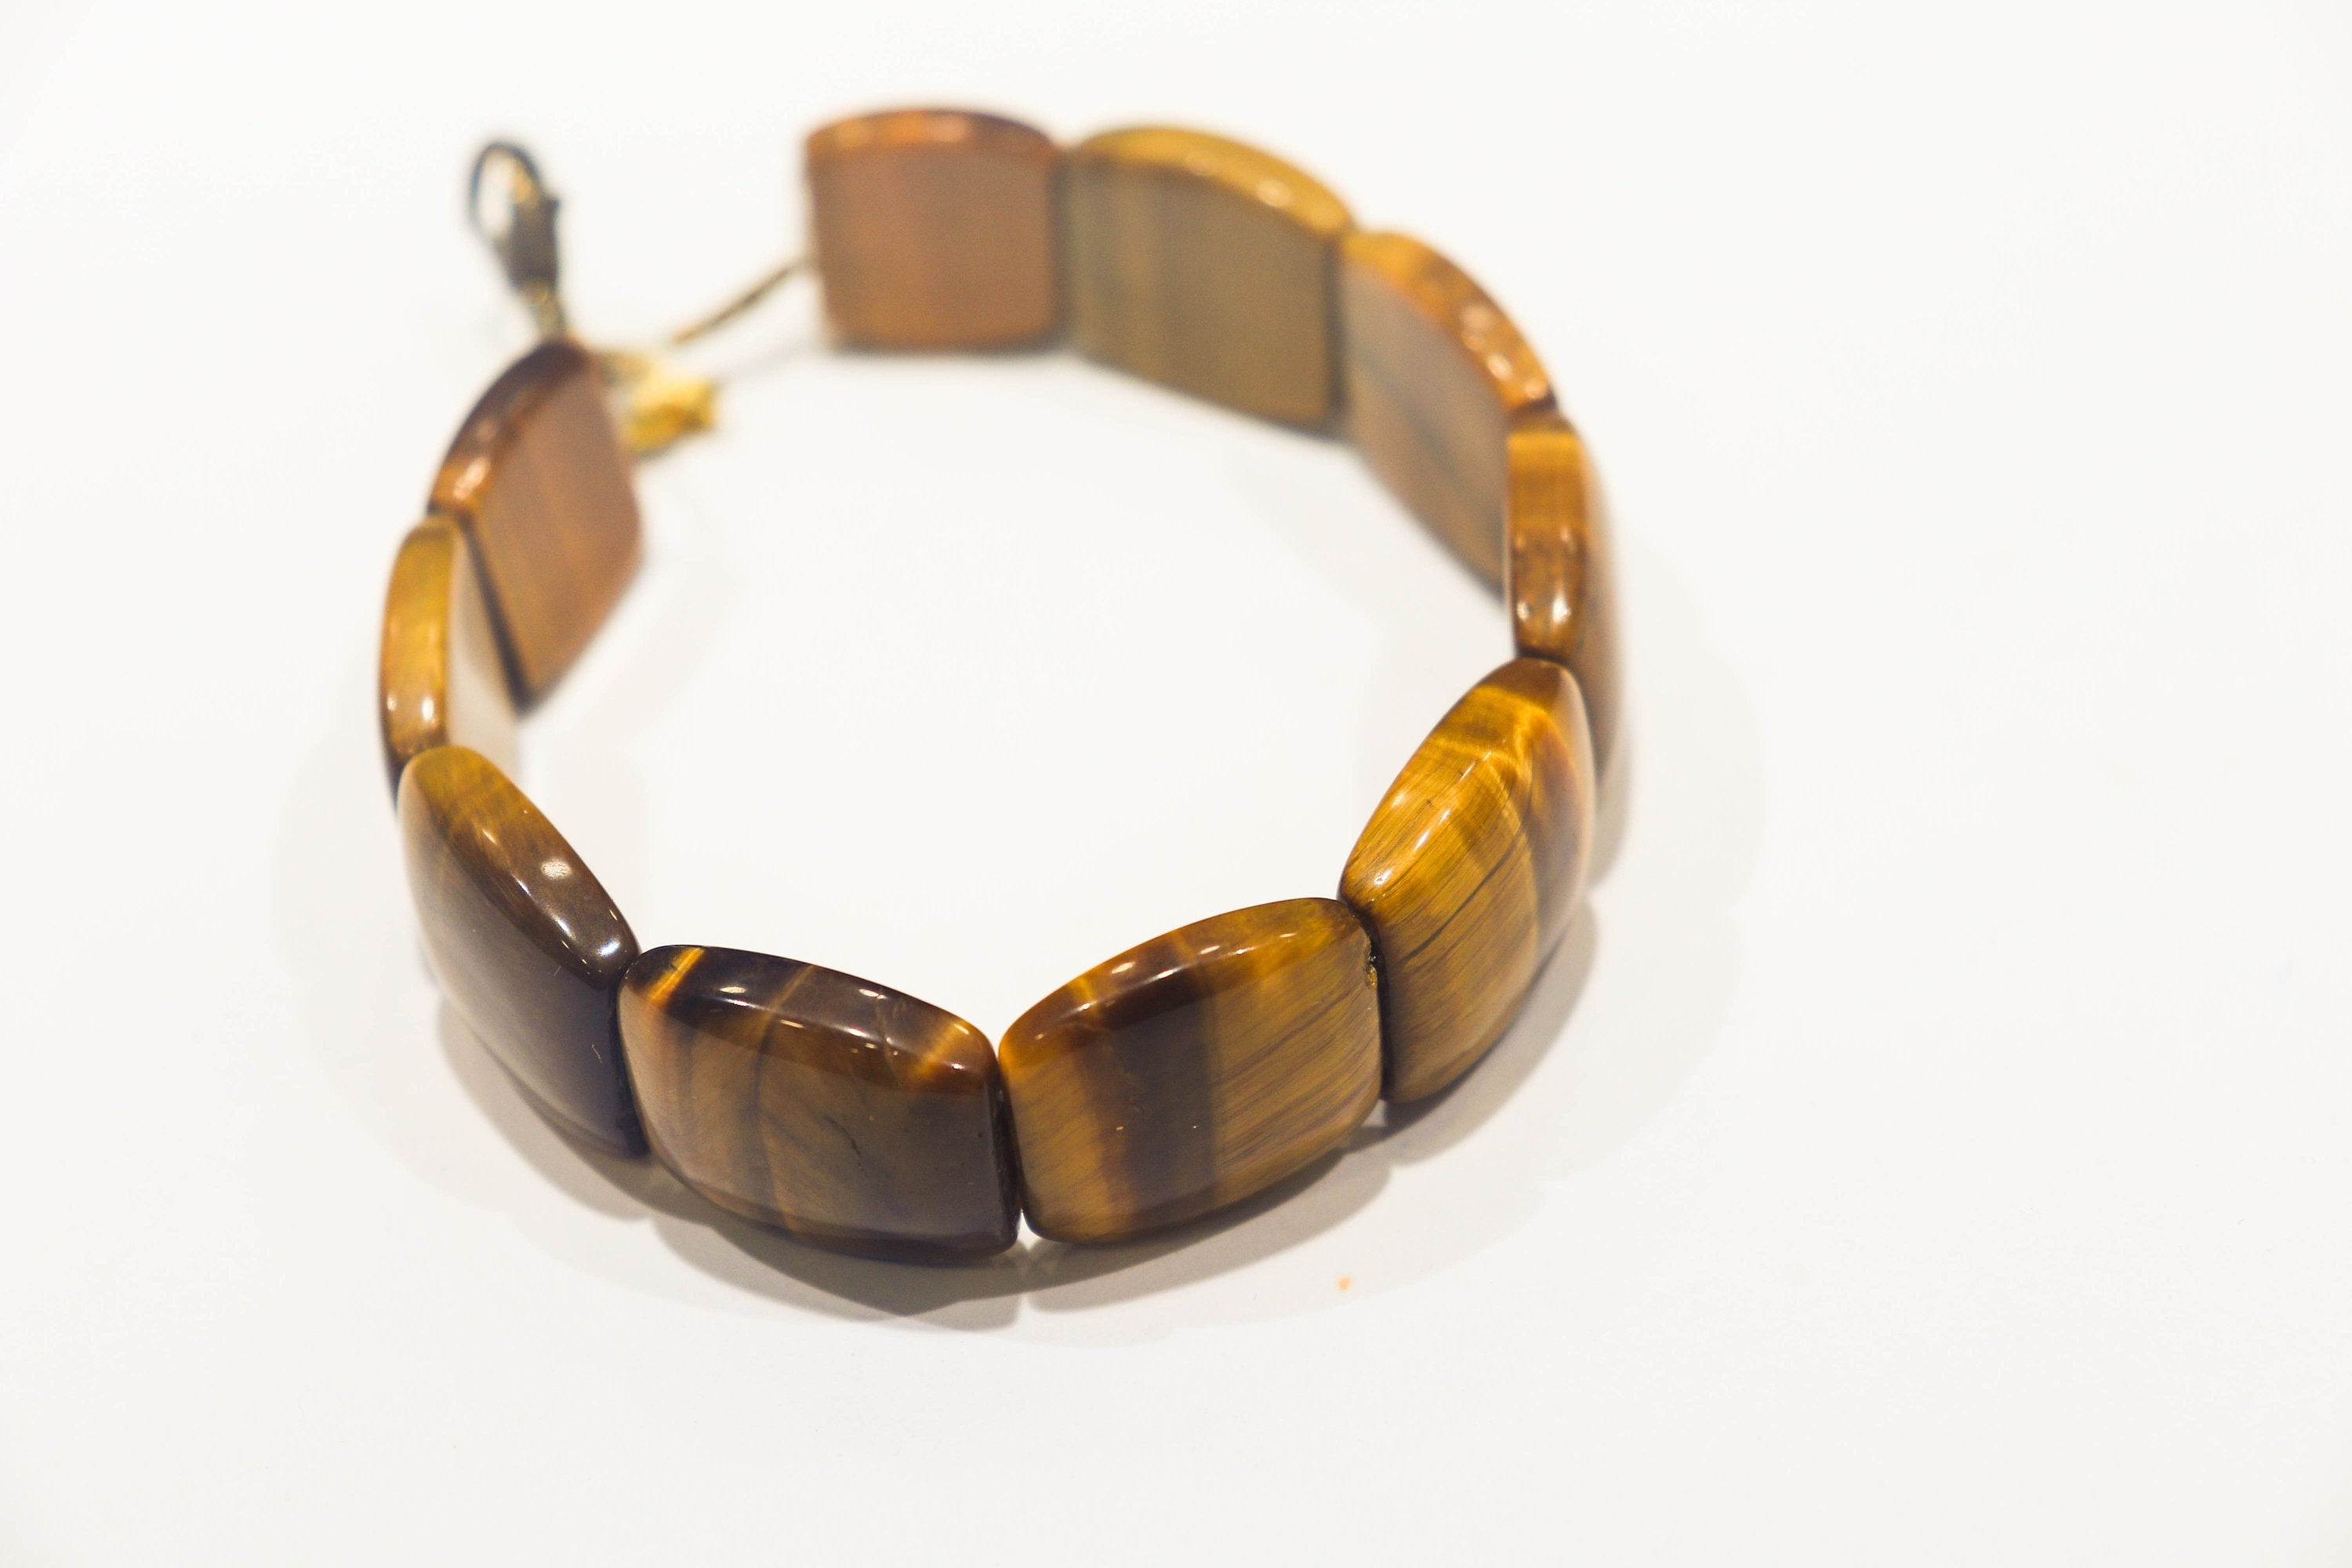 TIGER EYE Bracelet 7 inch length | 10 Pieces | Side Drill | Gemstone Beads for jewelry making | Beadsforyourjewellery Beadsforyourjewelry